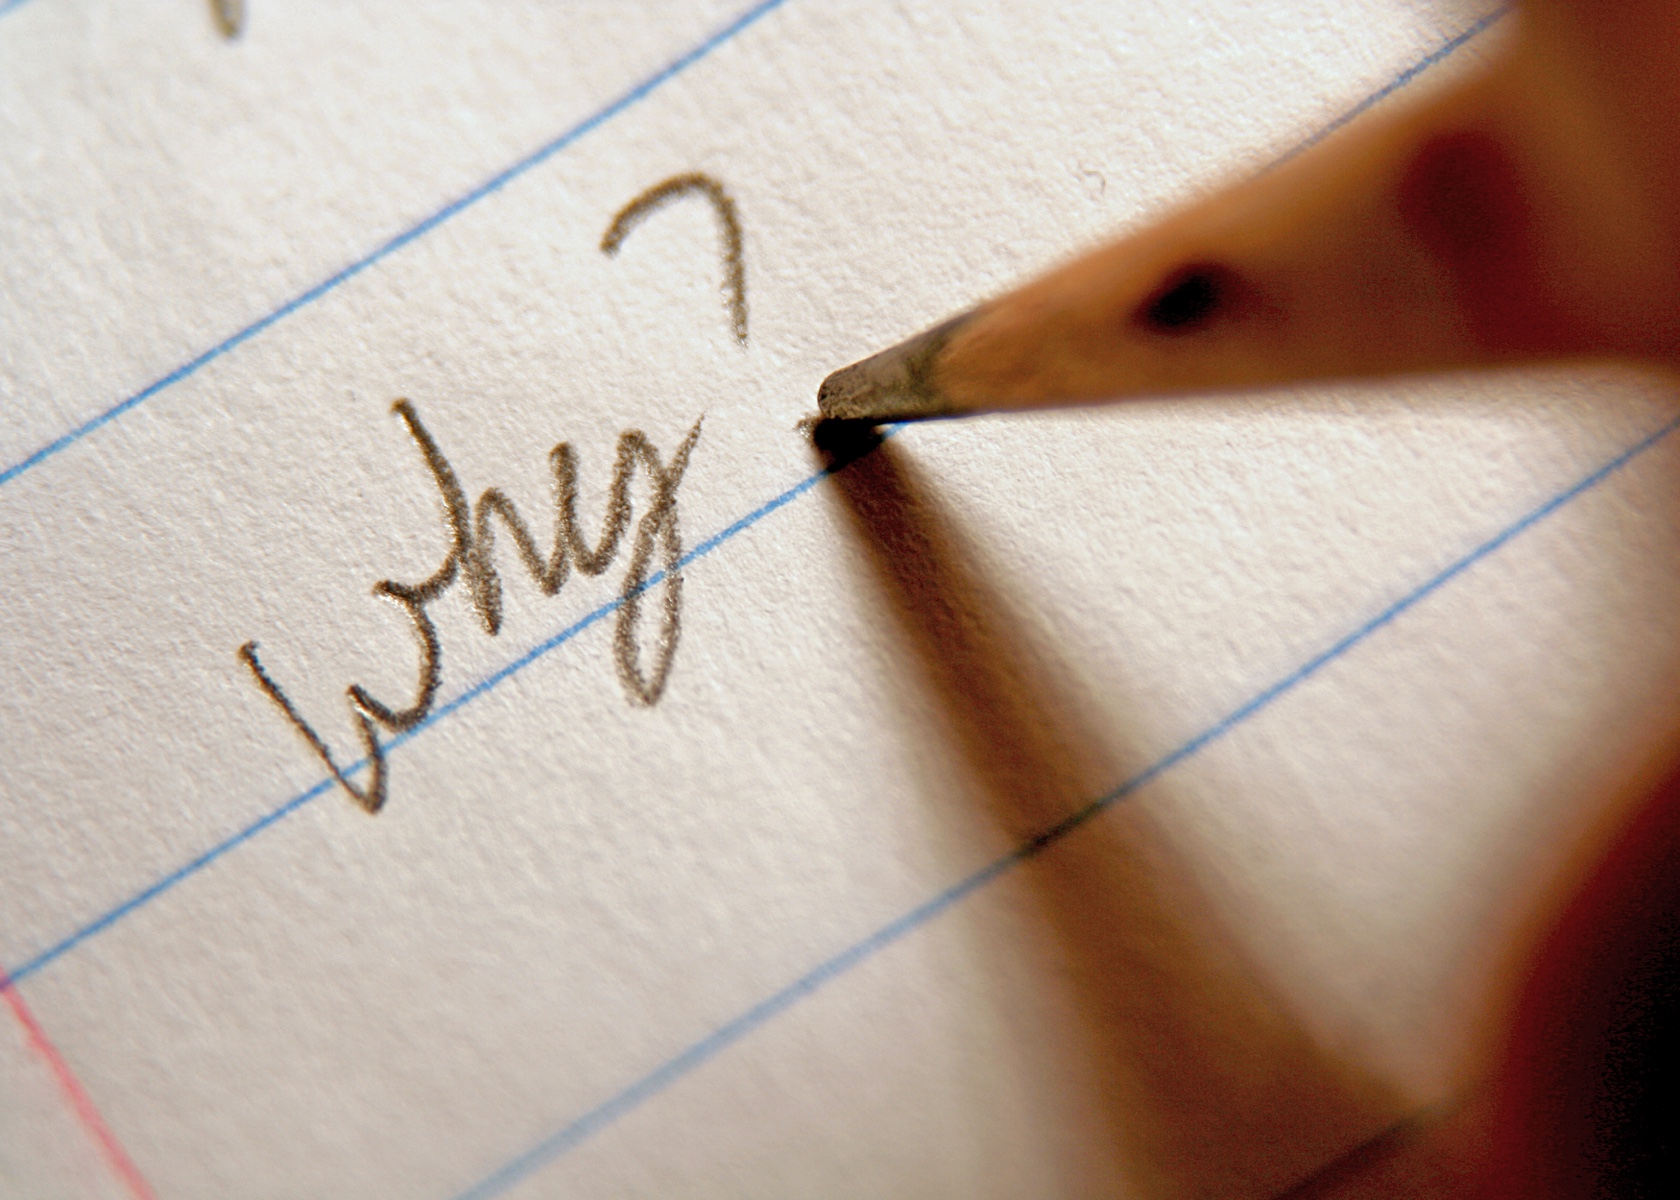 A pencil writing "why?" on a piece of lined paper.